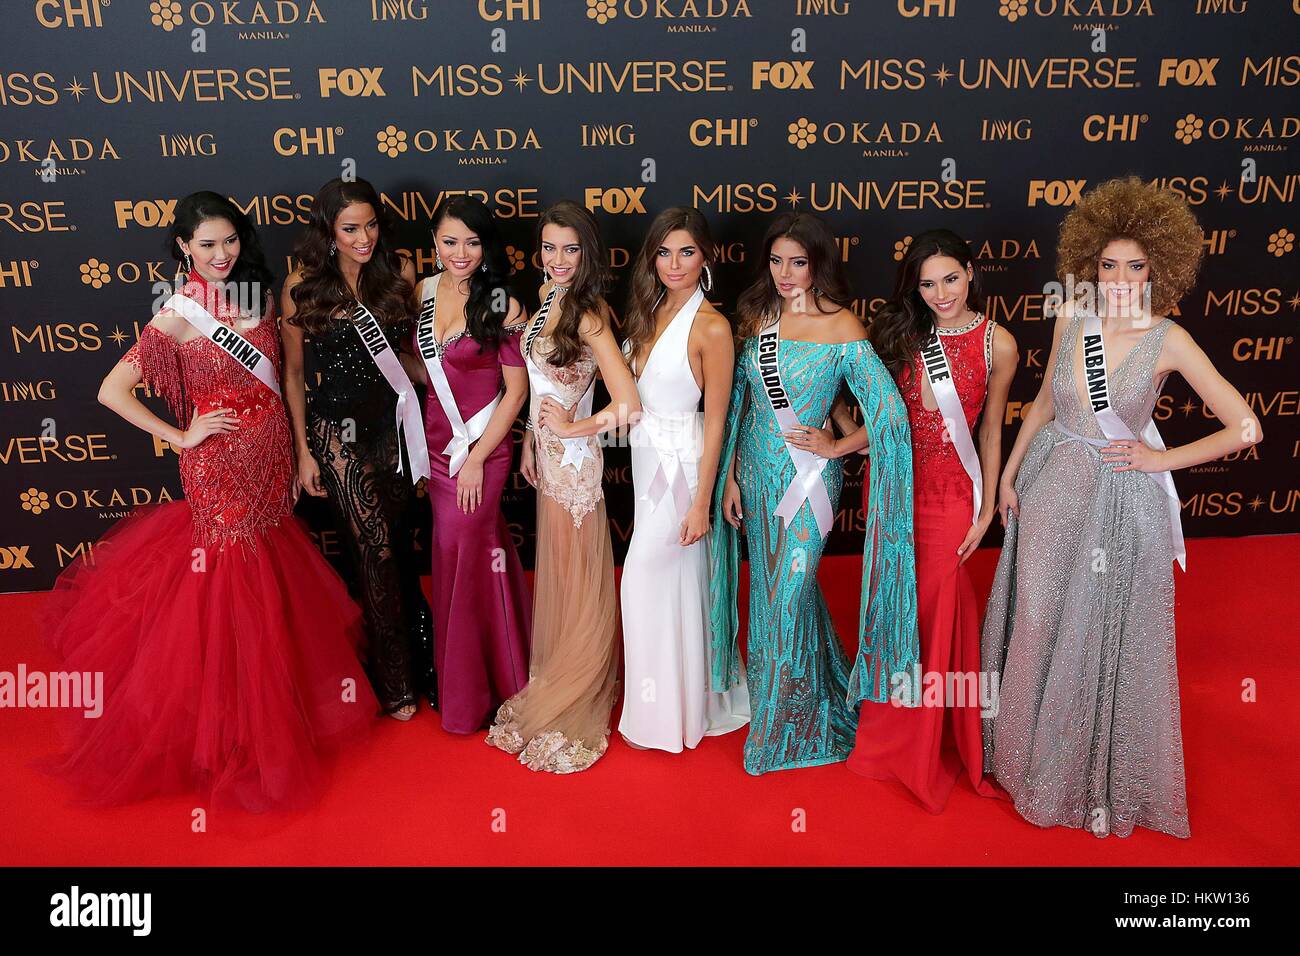 Pasay City, Philippines. 29th Jan, 2017. Miss Universe contestants pose for photos during the Miss Universe red carpet event in Pasay City, the Philippines, Jan. 29, 2017. Credit: Rouelle Umali/Xinhua/Alamy Live News Stock Photo